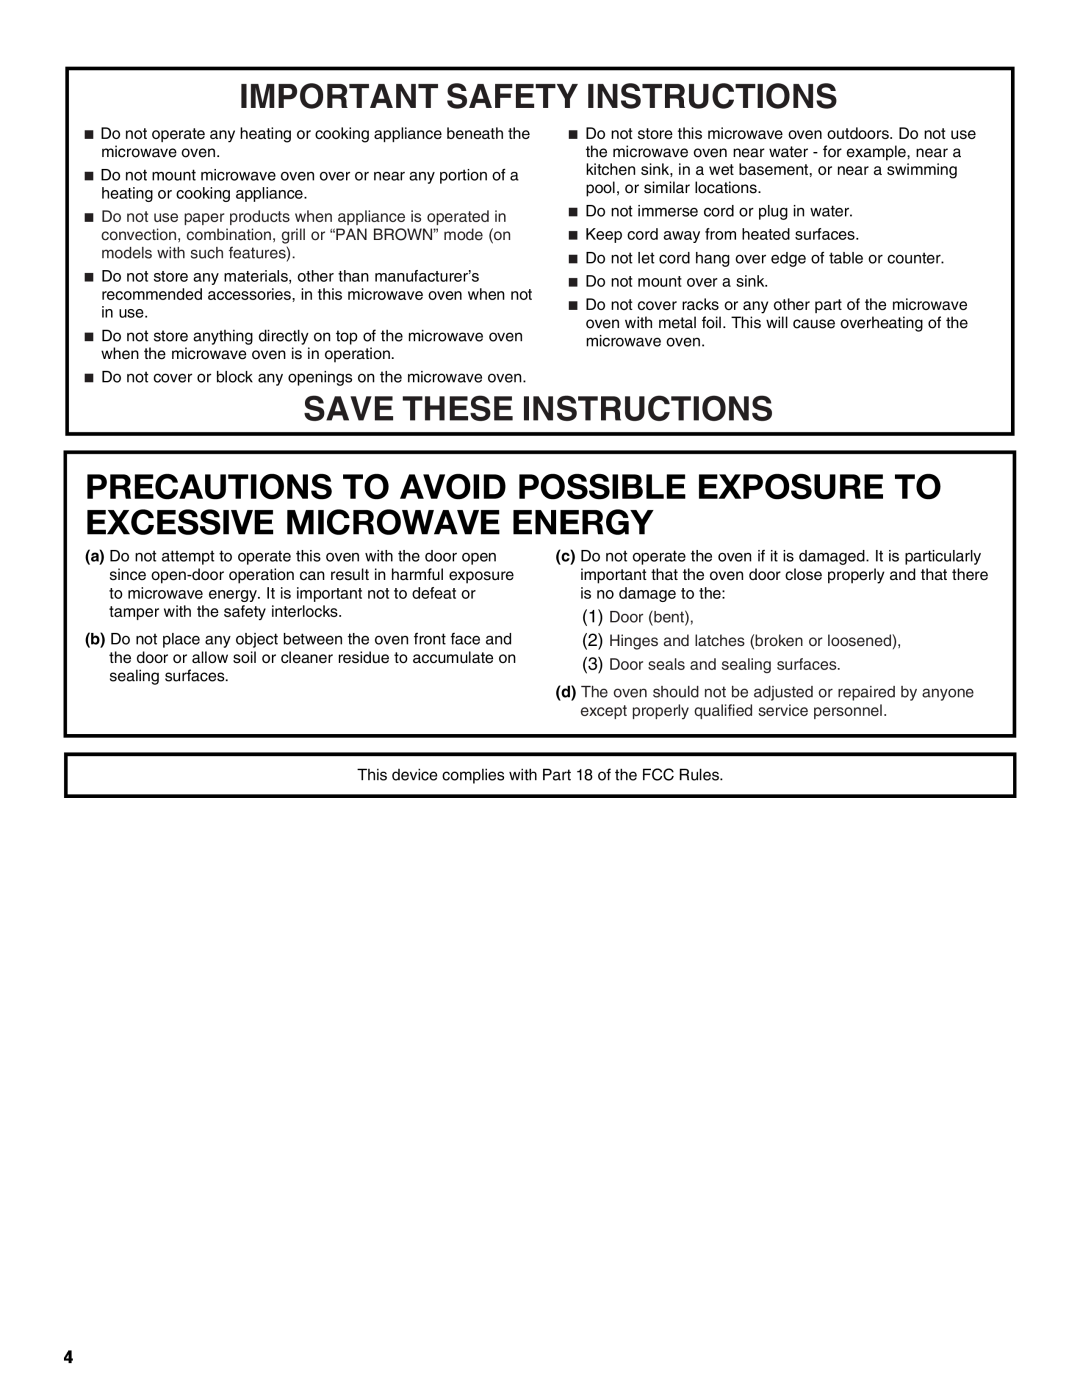 Whirlpool WMC30516AS Precautions To Avoid Possible Exposure To Excessive Microwave Energy, Important Safety Instructions 